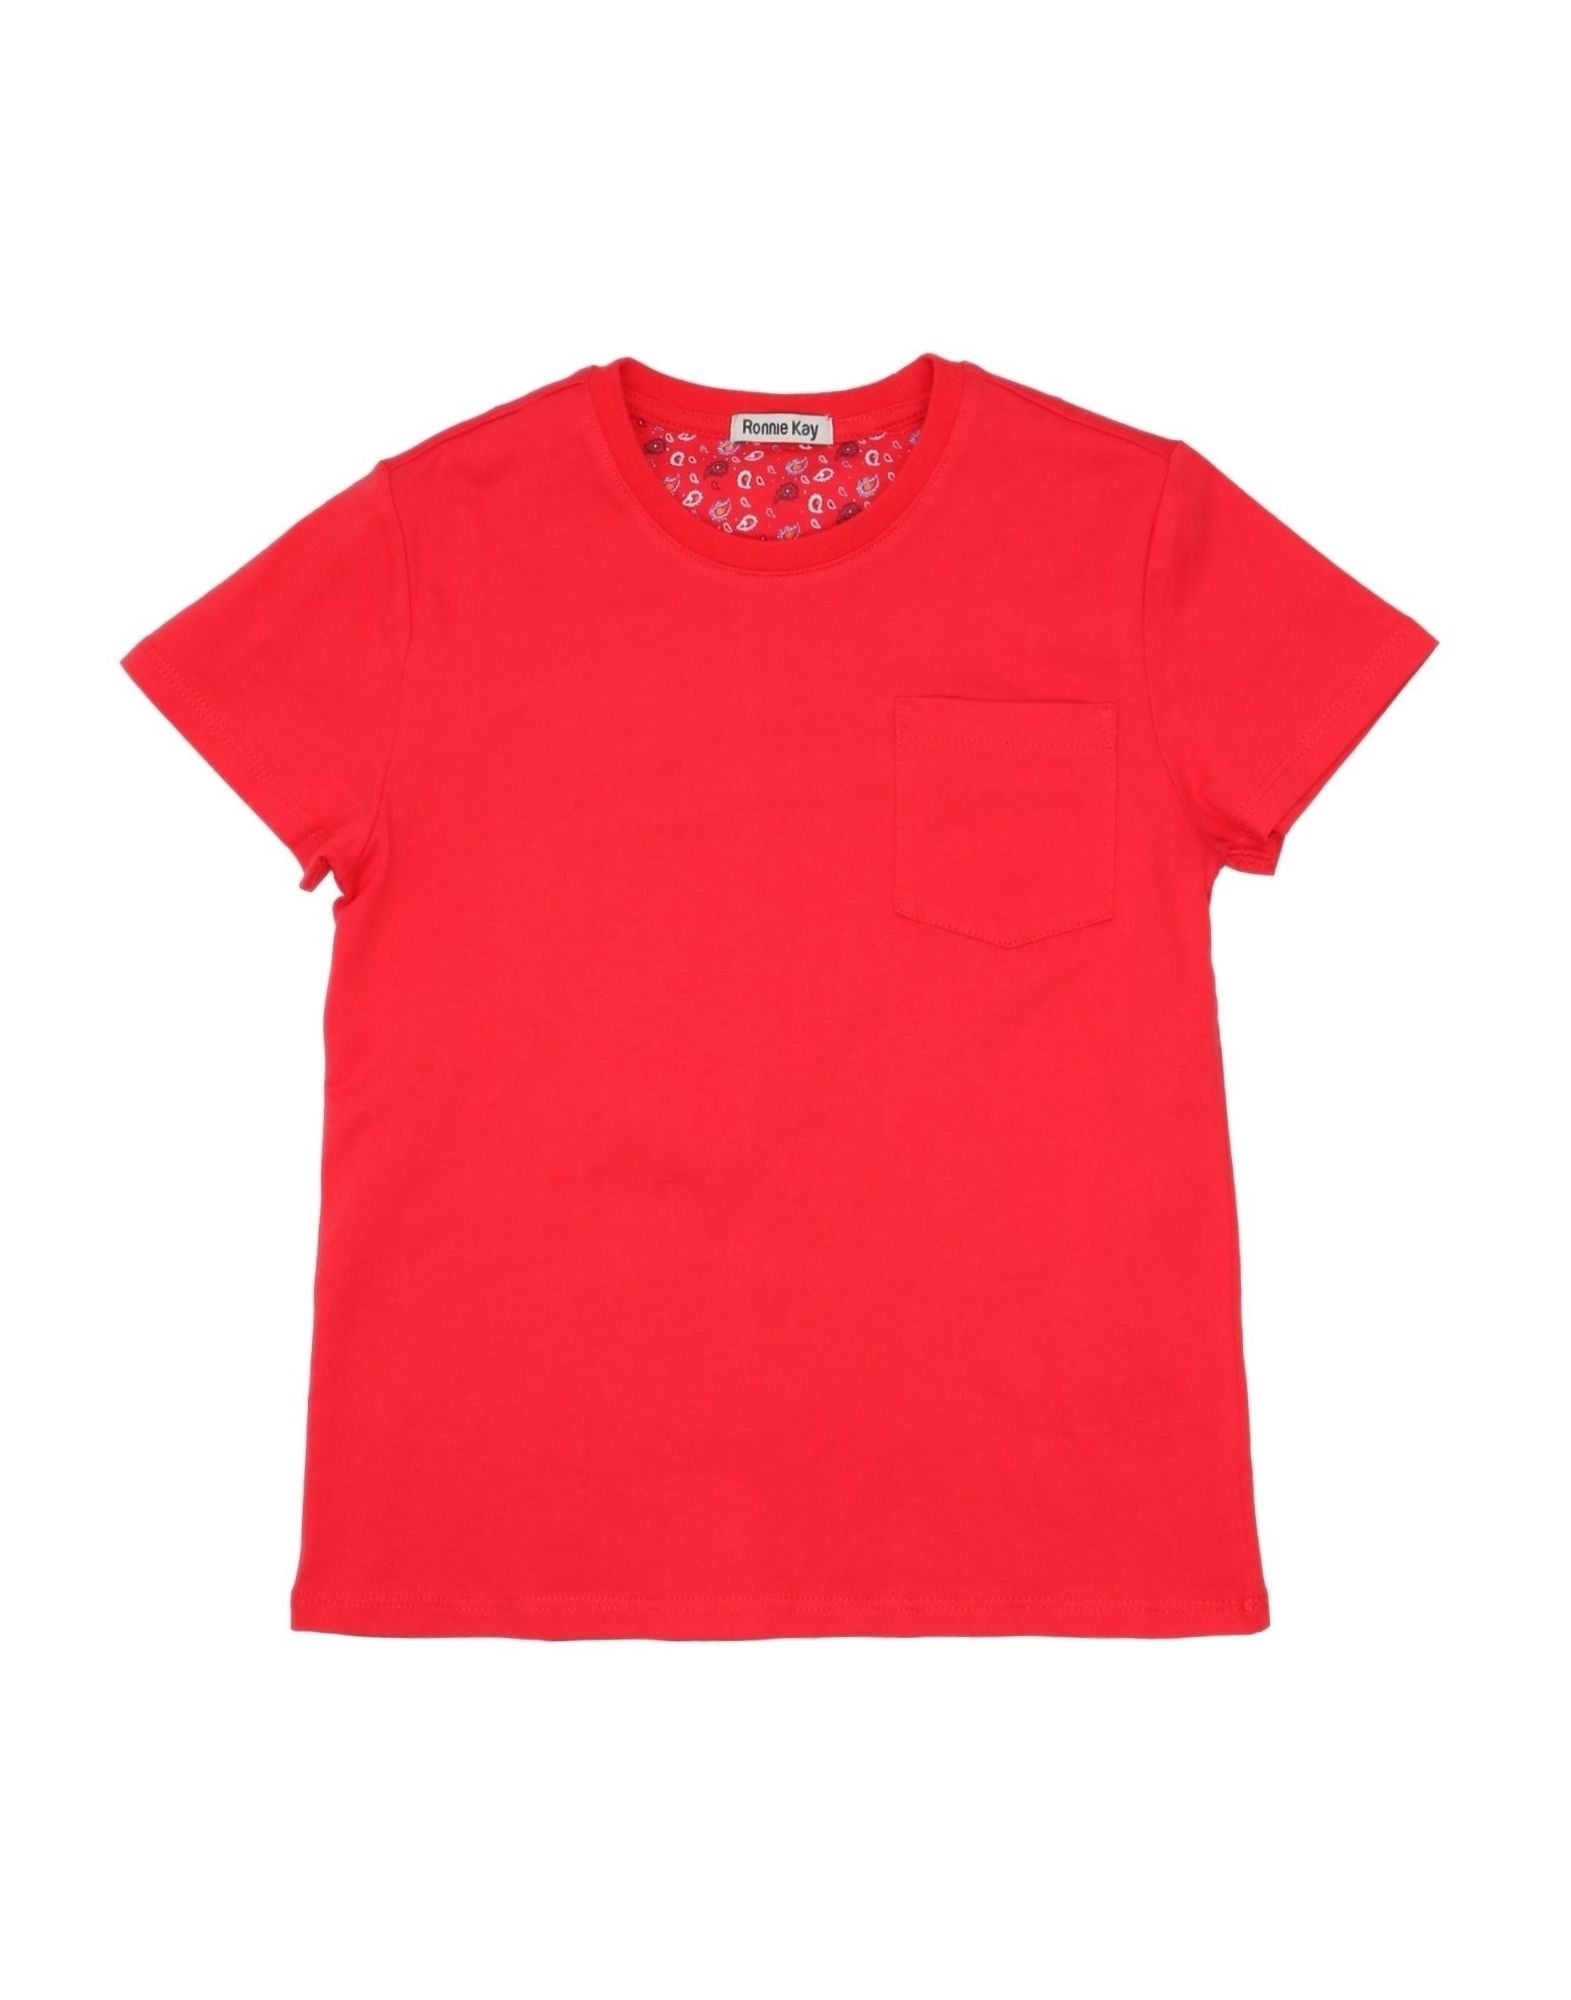 Ronnie Kay Kids' T-shirts In Red